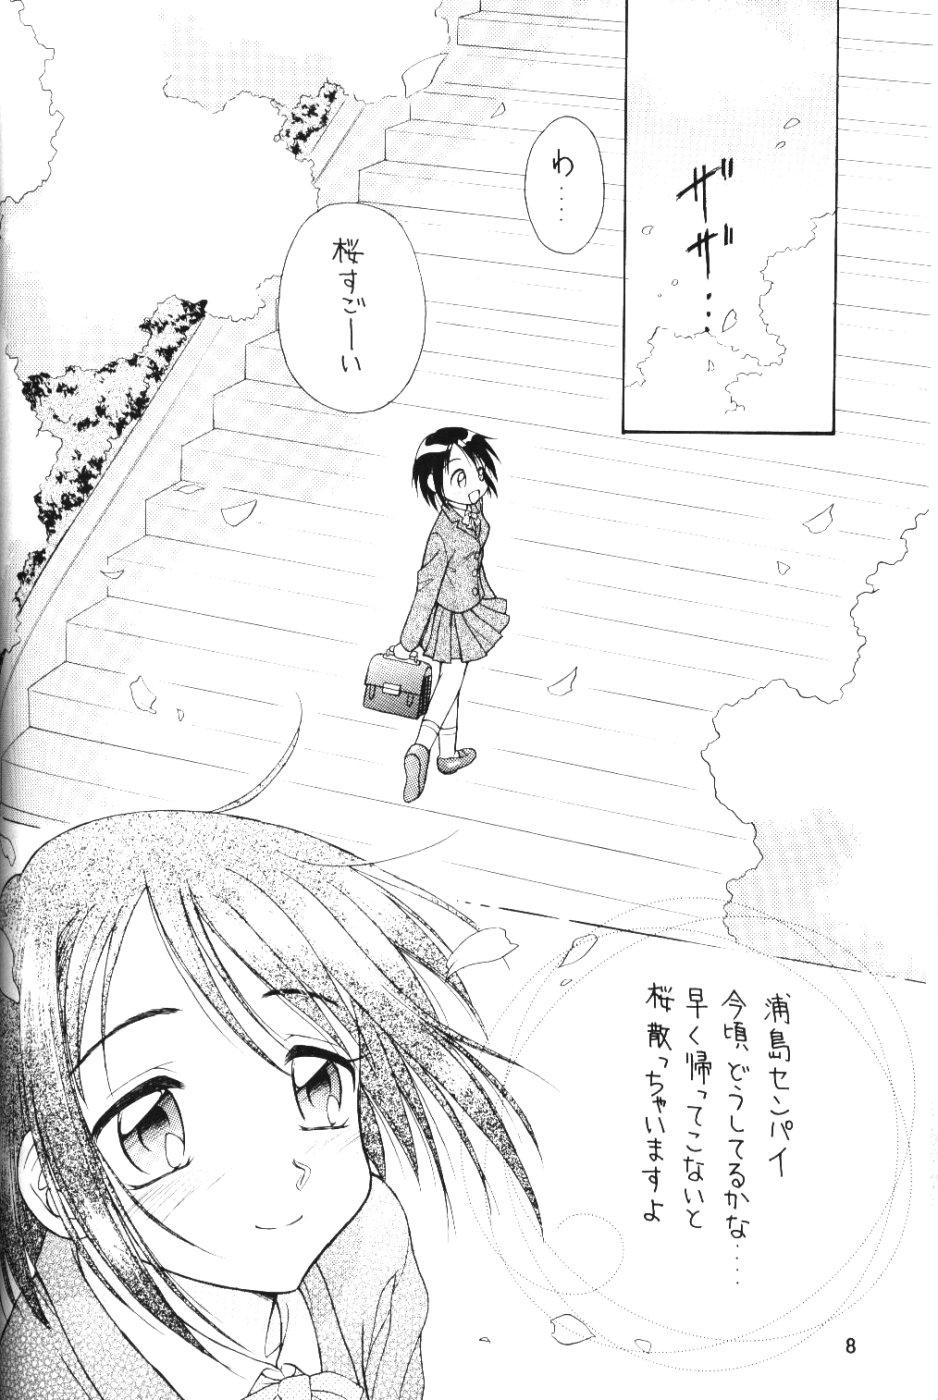 Sislovesme Lovely 4 - Love hina Russia - Page 7